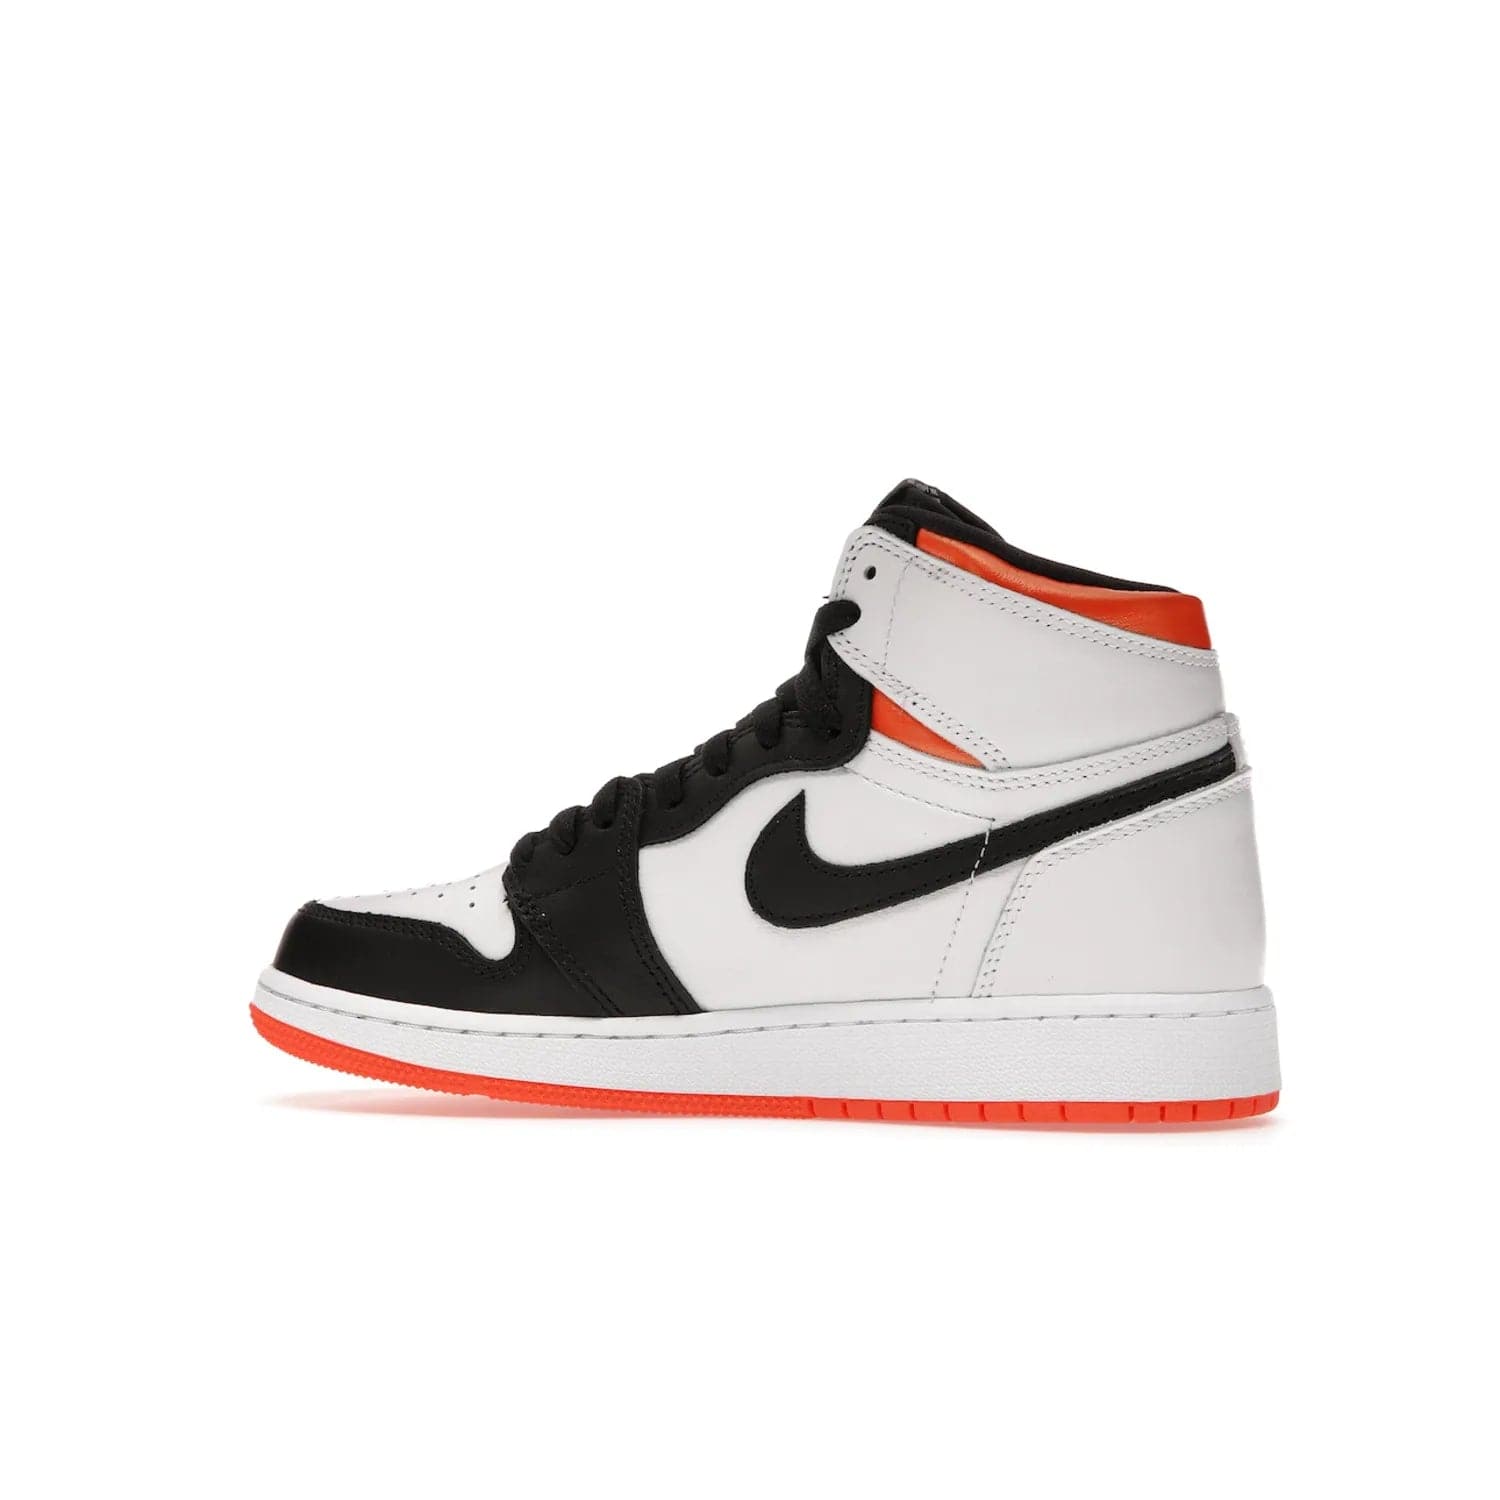 Jordan 1 High OG Electro Orange (GS) - Image 21 - Only at www.BallersClubKickz.com - The Air Jordan 1 High OG Electro Orange GS is the ideal shoe for kids on the go. Featuring white leather uppers, black overlays, and bright orange accents, it's sure to become a favorite. A great mix of classic style and vibrant colors, the shoe delivers air cushioning for comfort and hard orange rubber for grip. Release on July 17th, 2021. Get them a pair today.